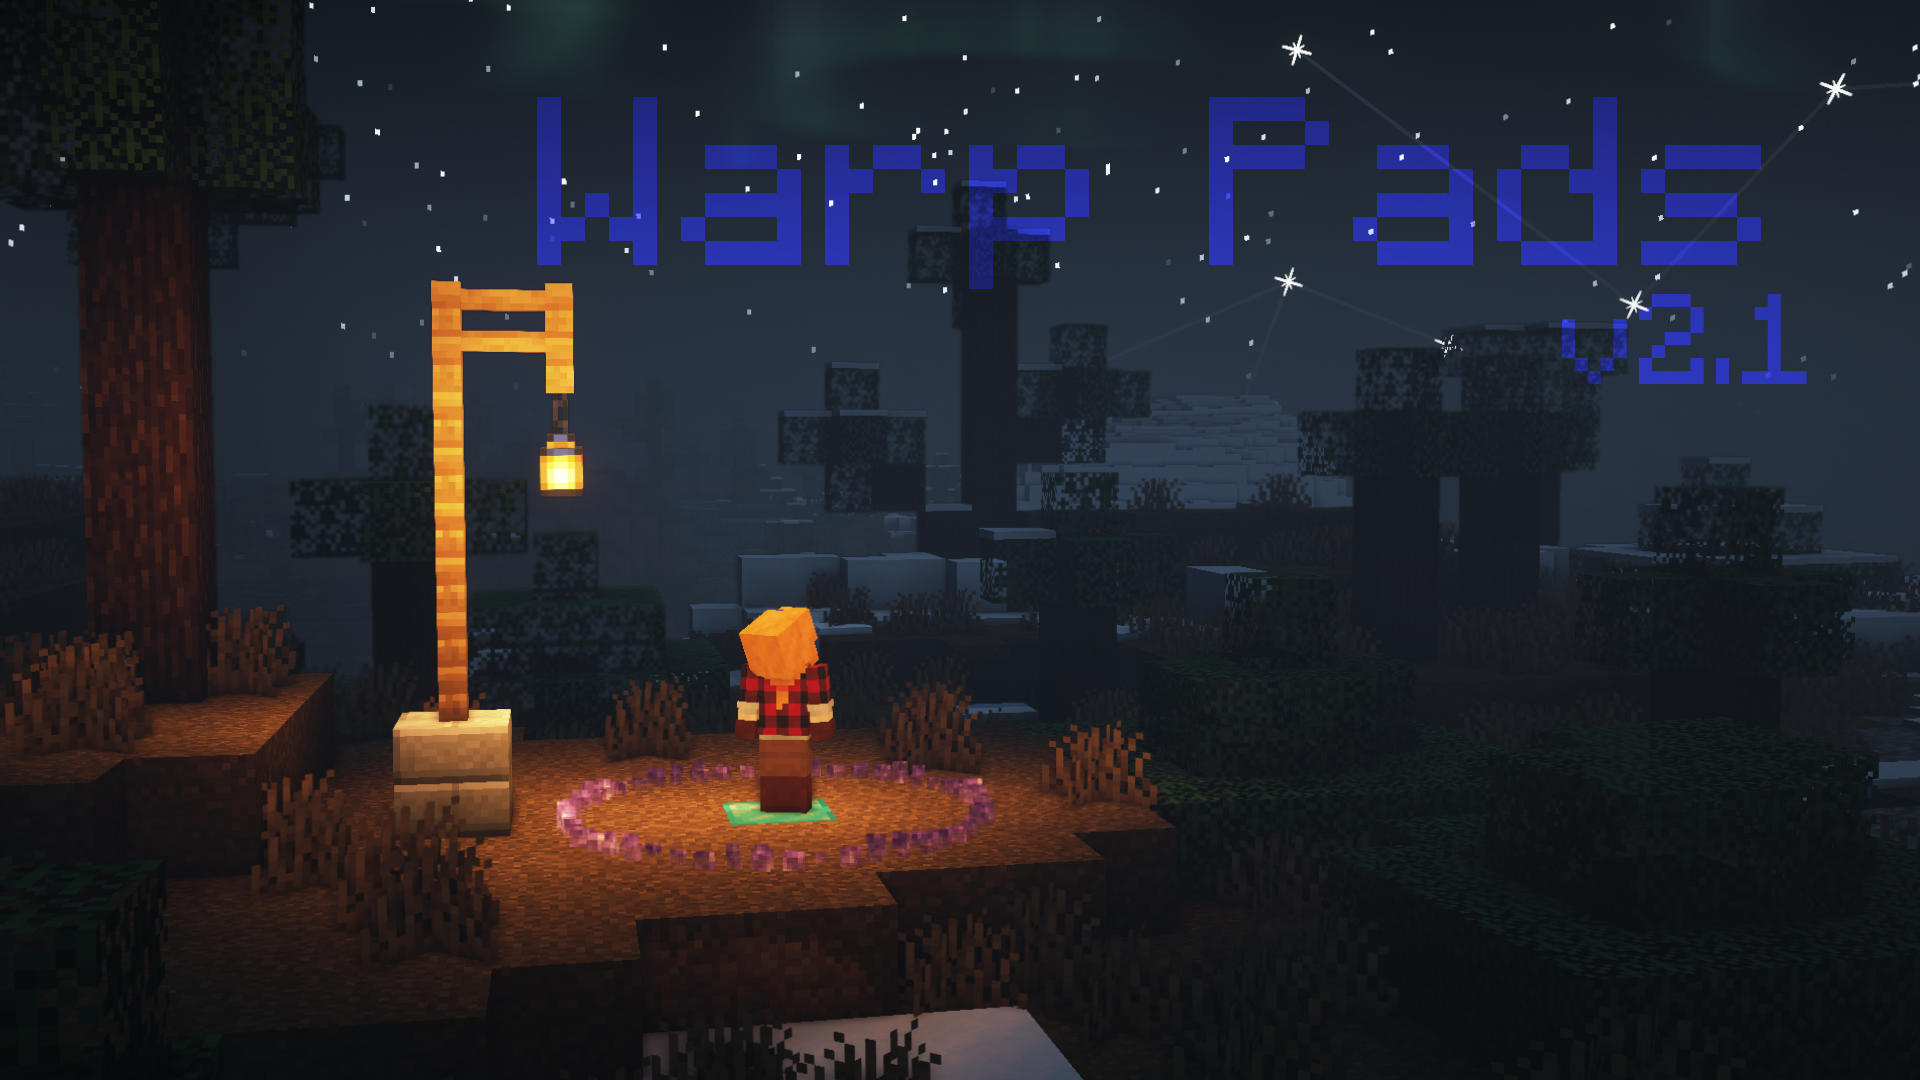 Screenshot of a player on a warp pad next to a lamppost, with the text "Warp Pads v2.1" in the sky.